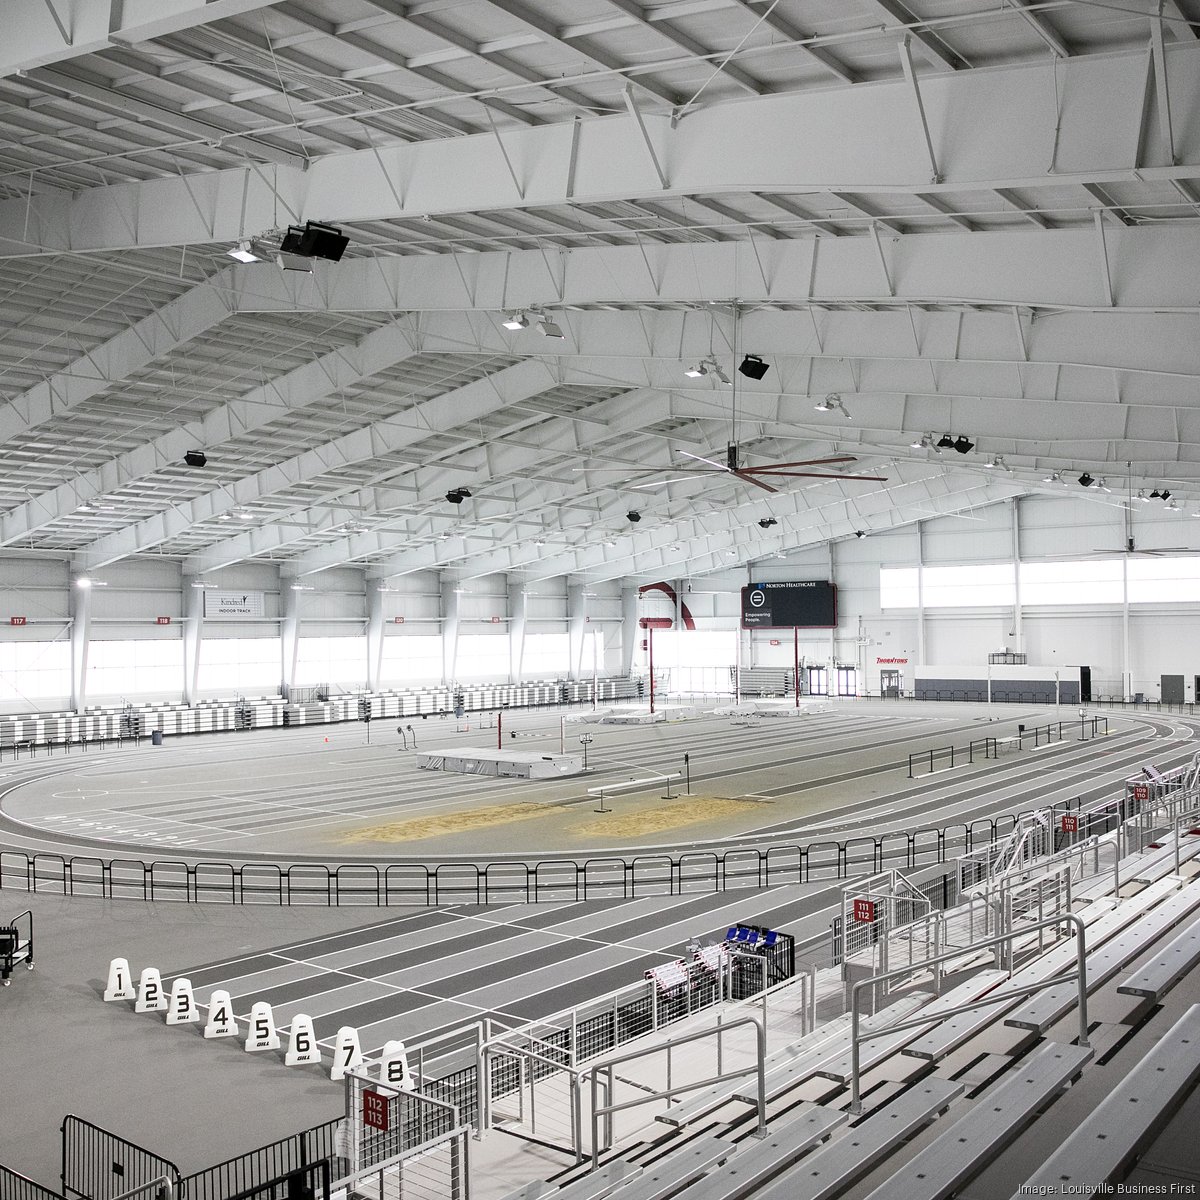 2023 USA Track and Field Masters Indoor Championships in Louisville